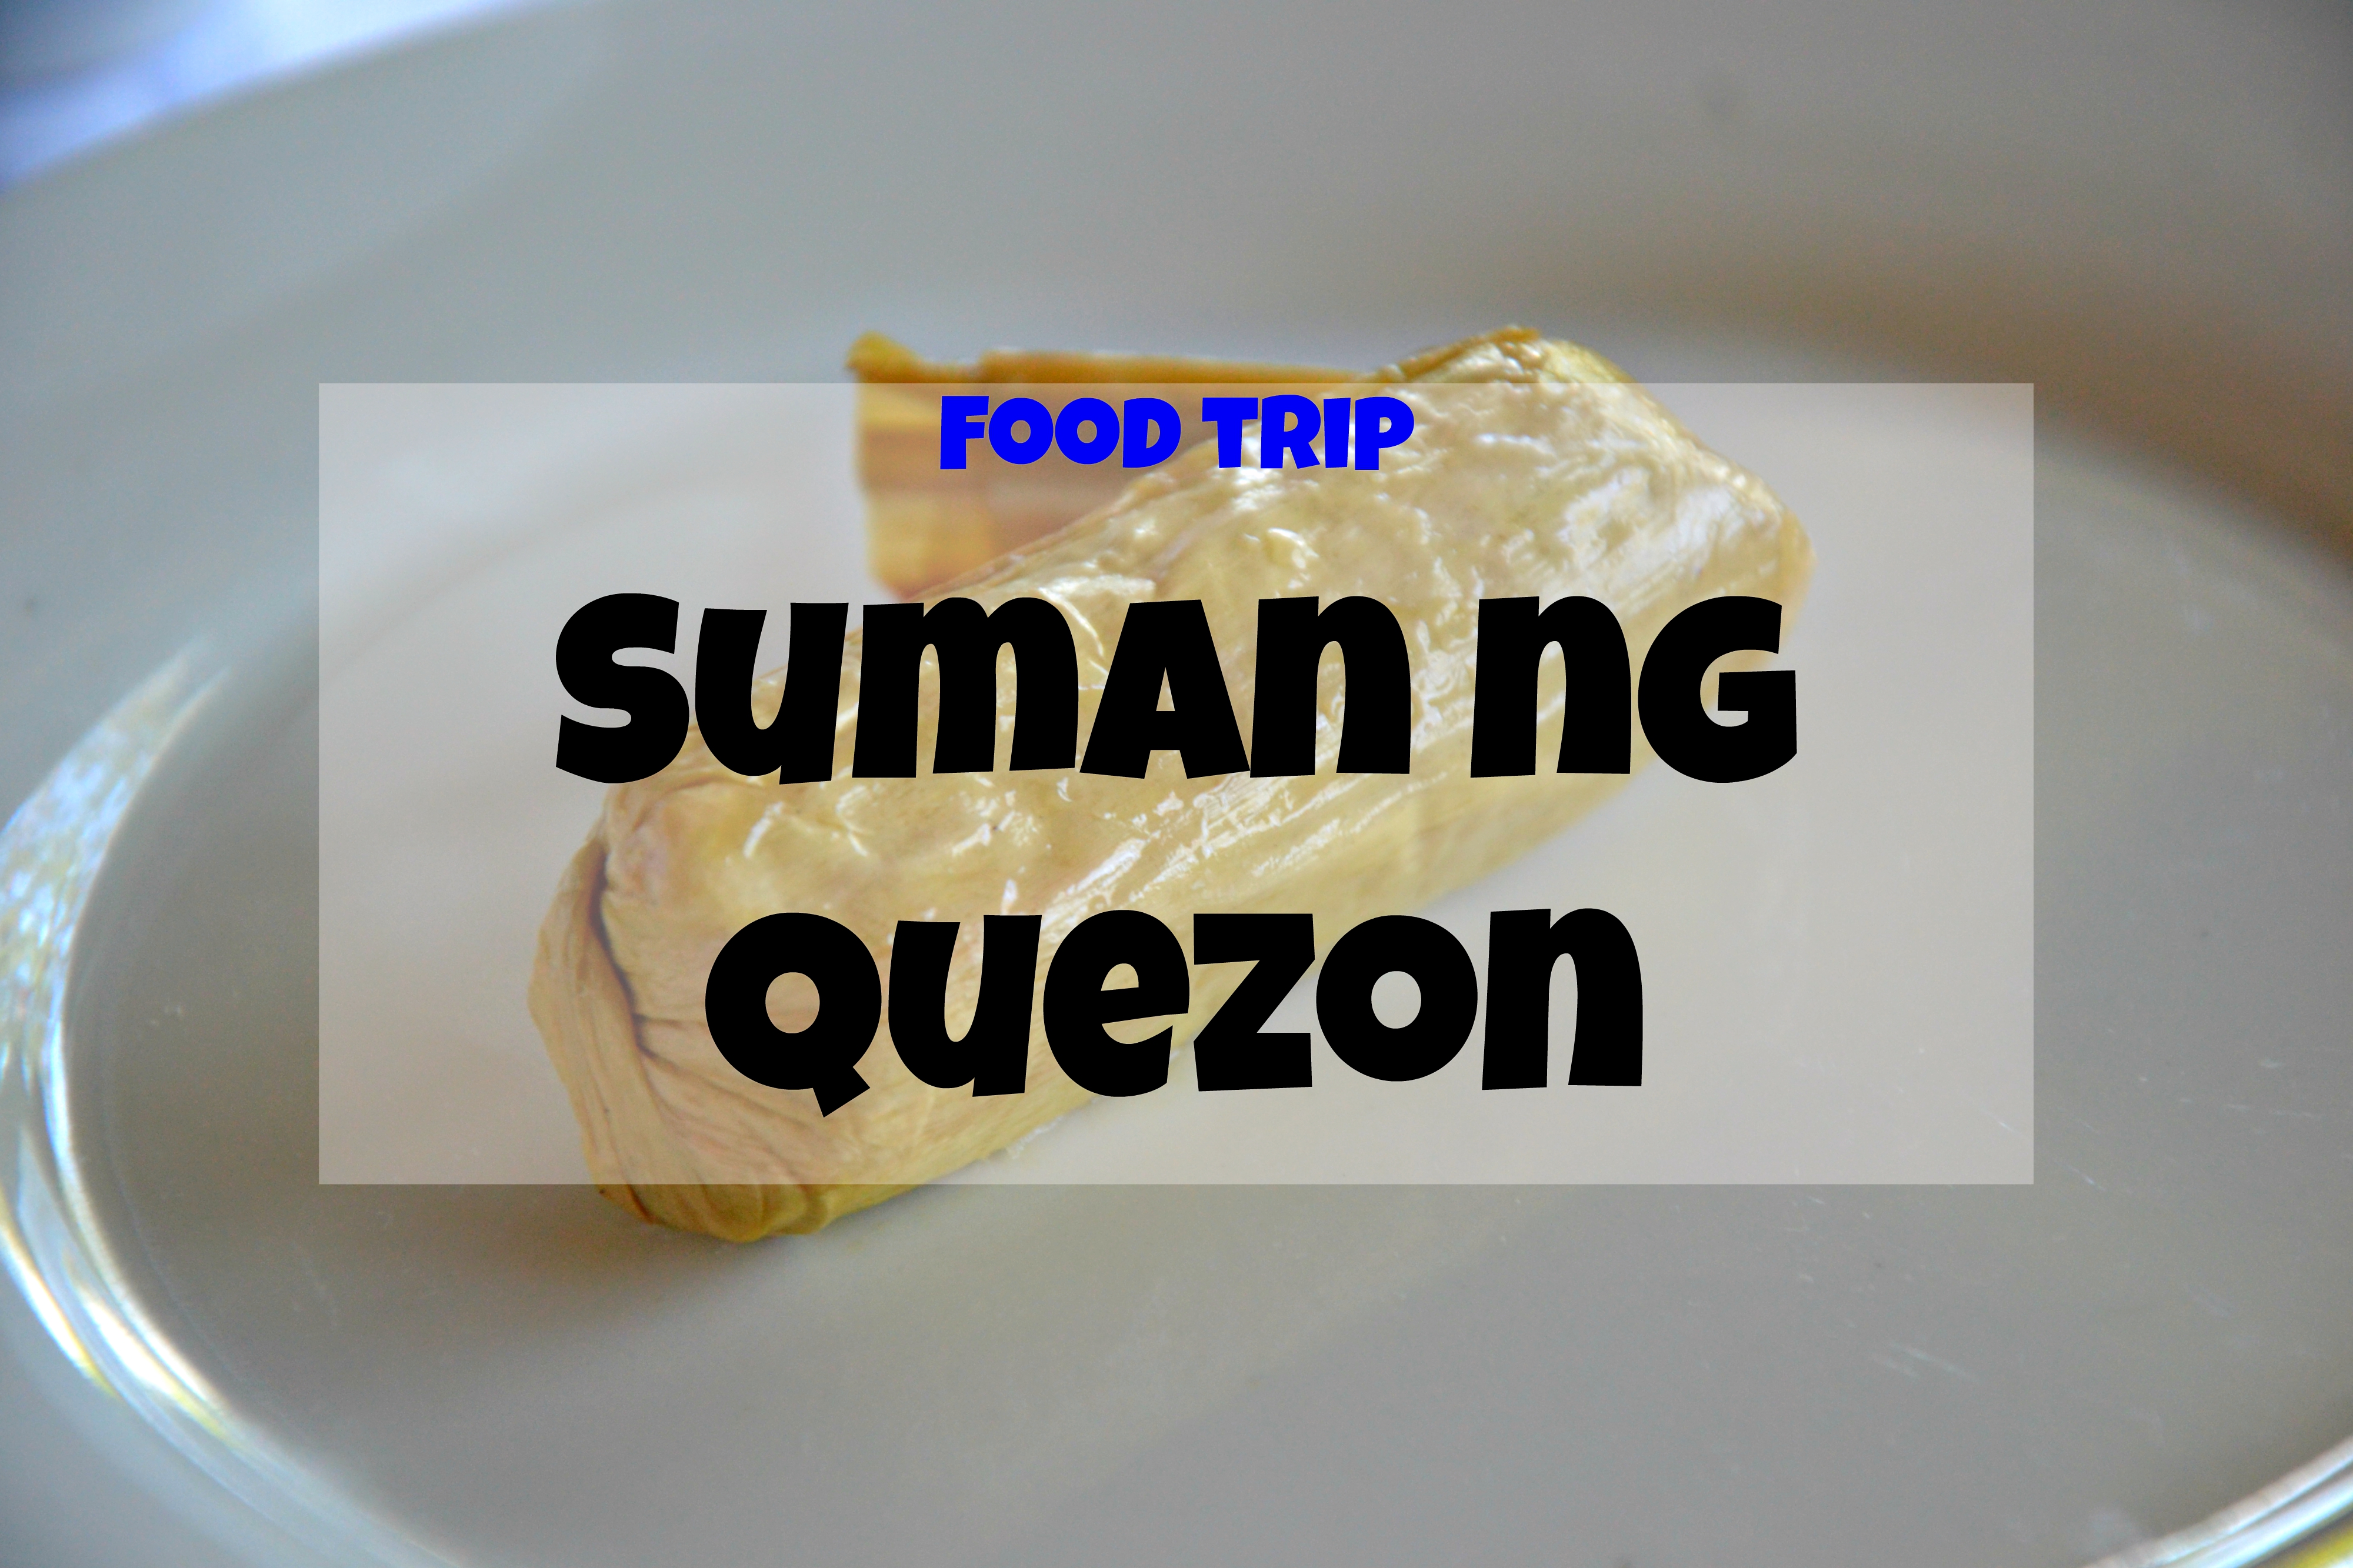 Let's check out the different suman of the province of Quezon